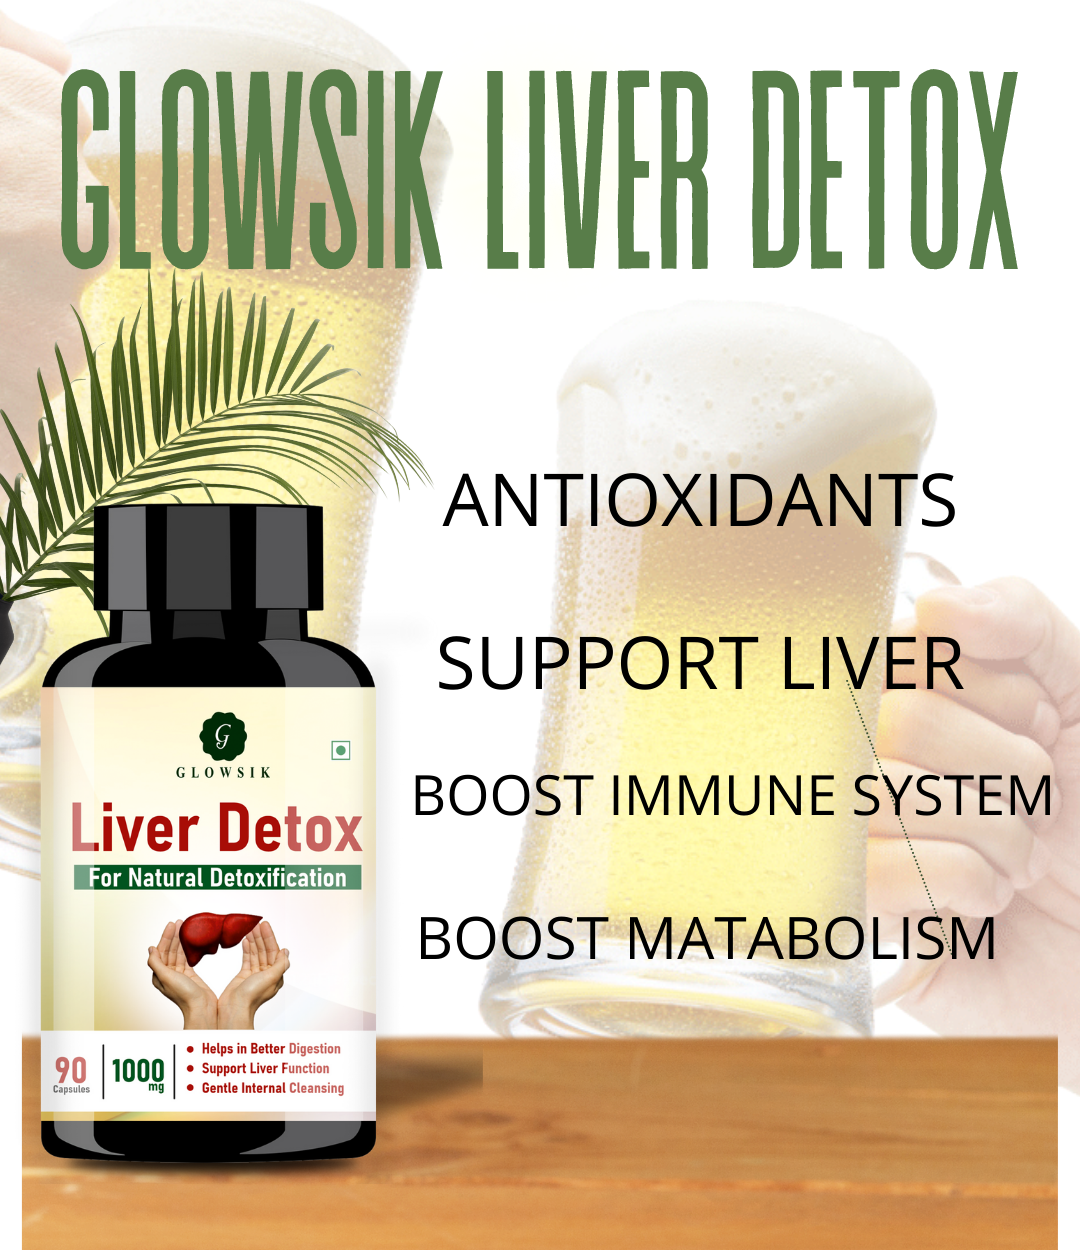 Glowsik Liver Detox Supplement Ayurvedic 1000mg with Milk Thistle for Liver Cleanse - 90 capsules